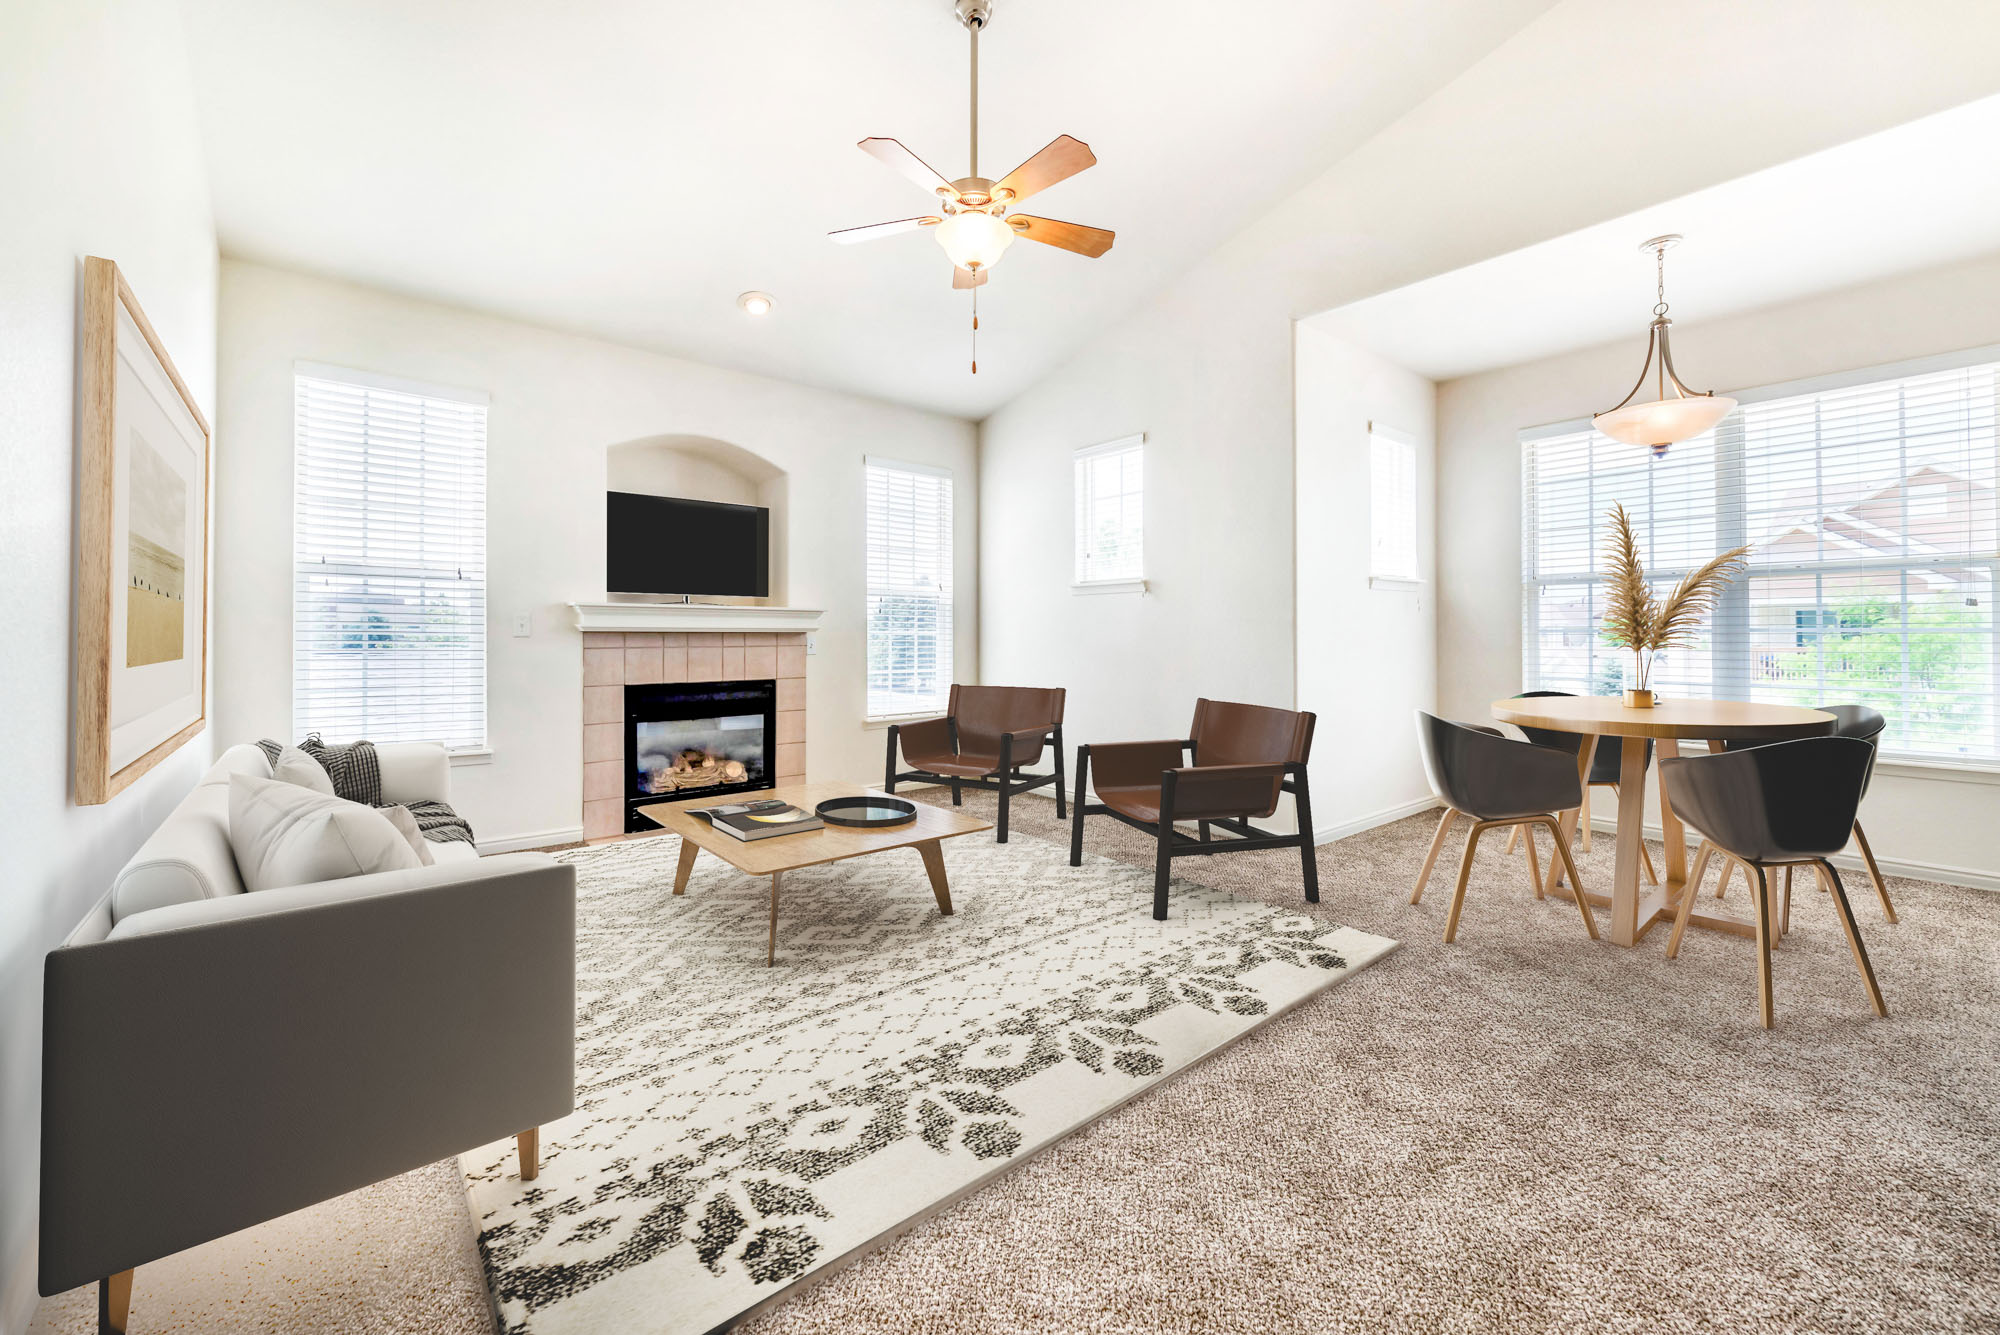 A living space at Eagle Ridge apartments in Denver, CO.